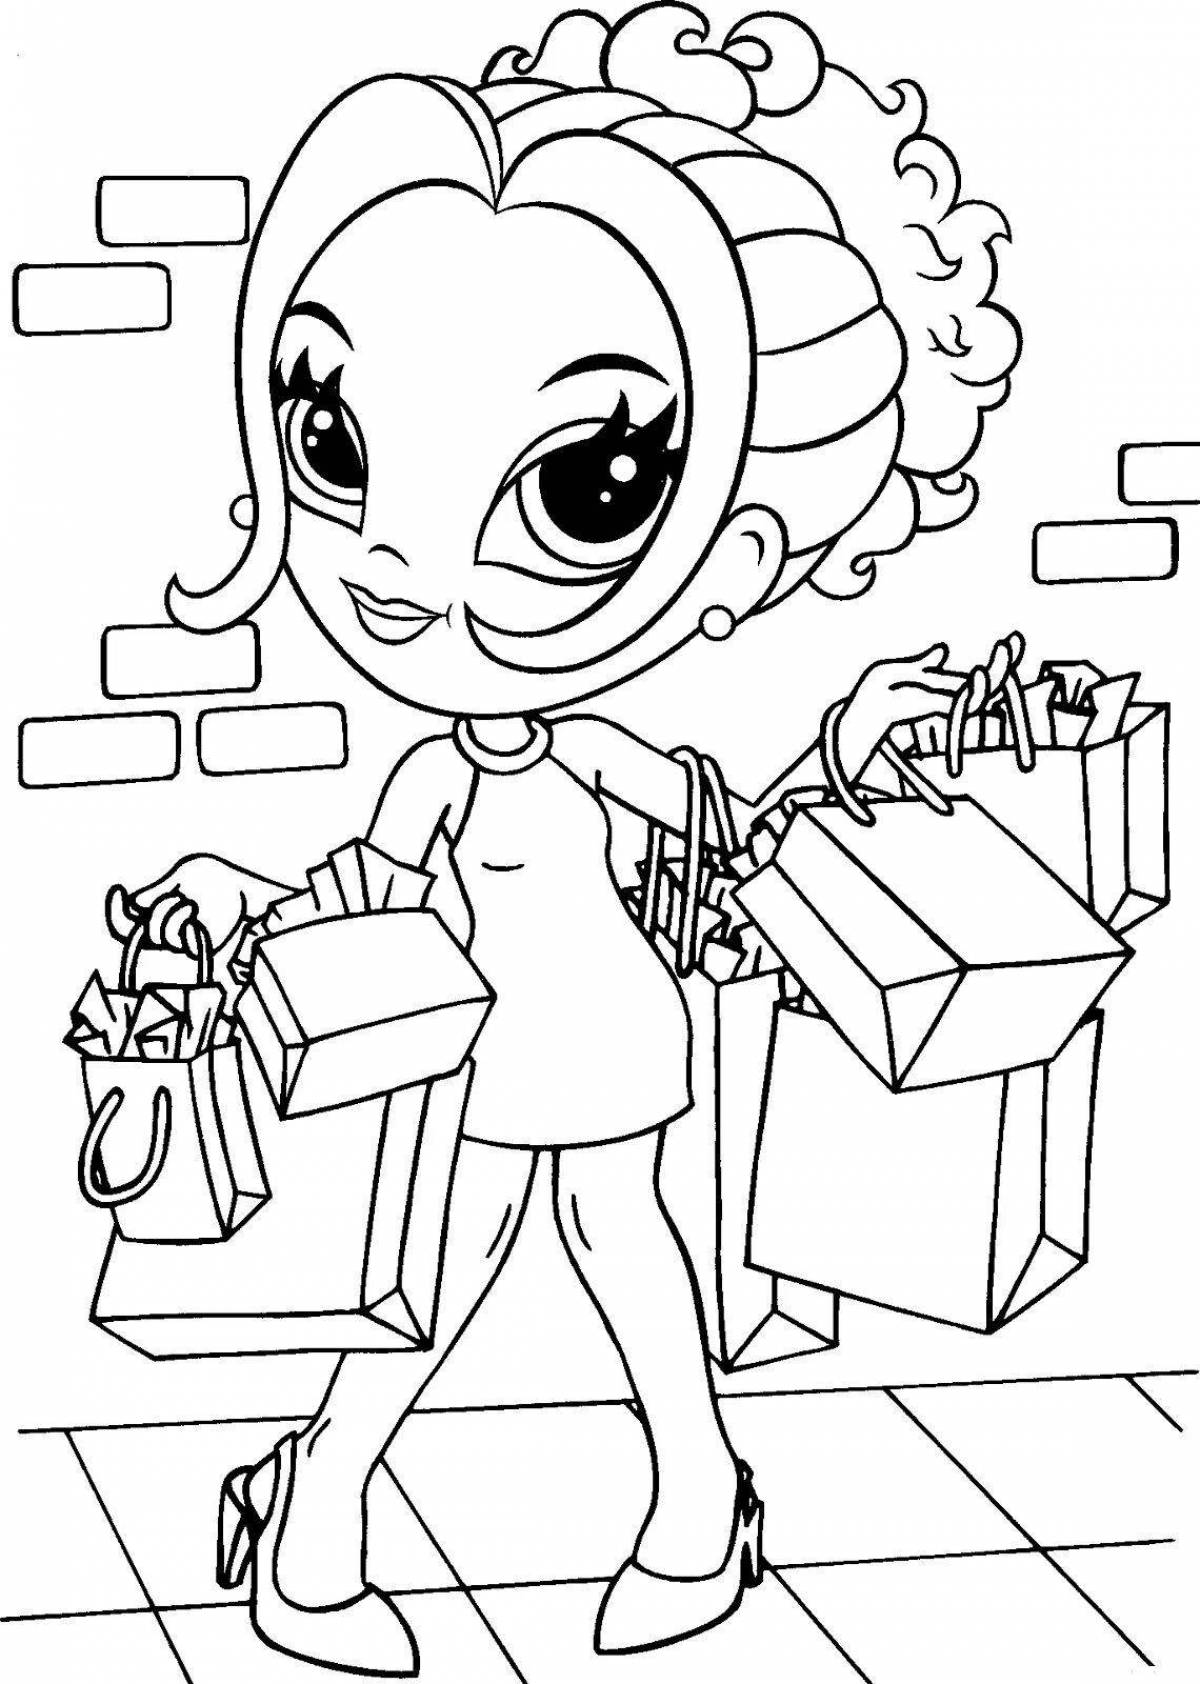 Playful shopping coloring page